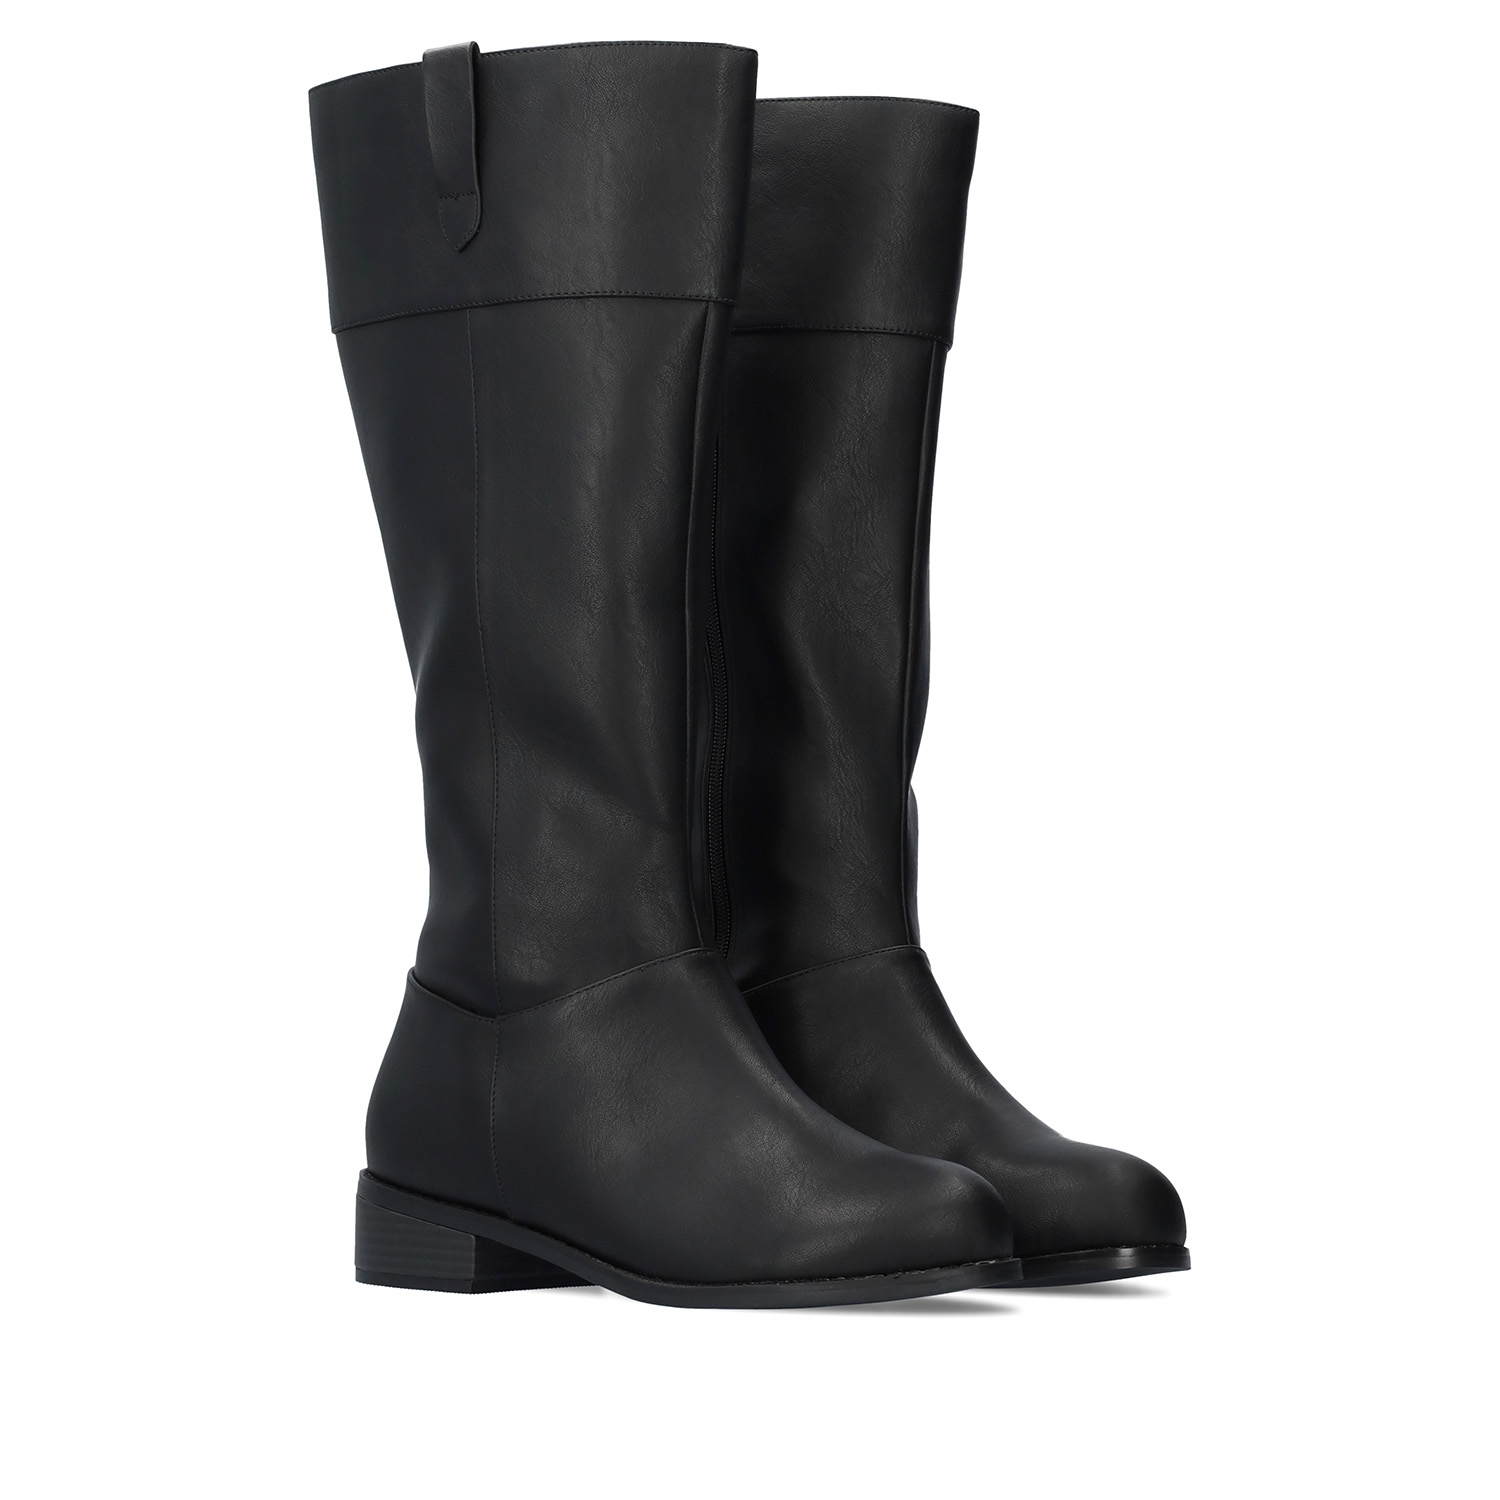 Flat high-calf boots in black faux leather. 